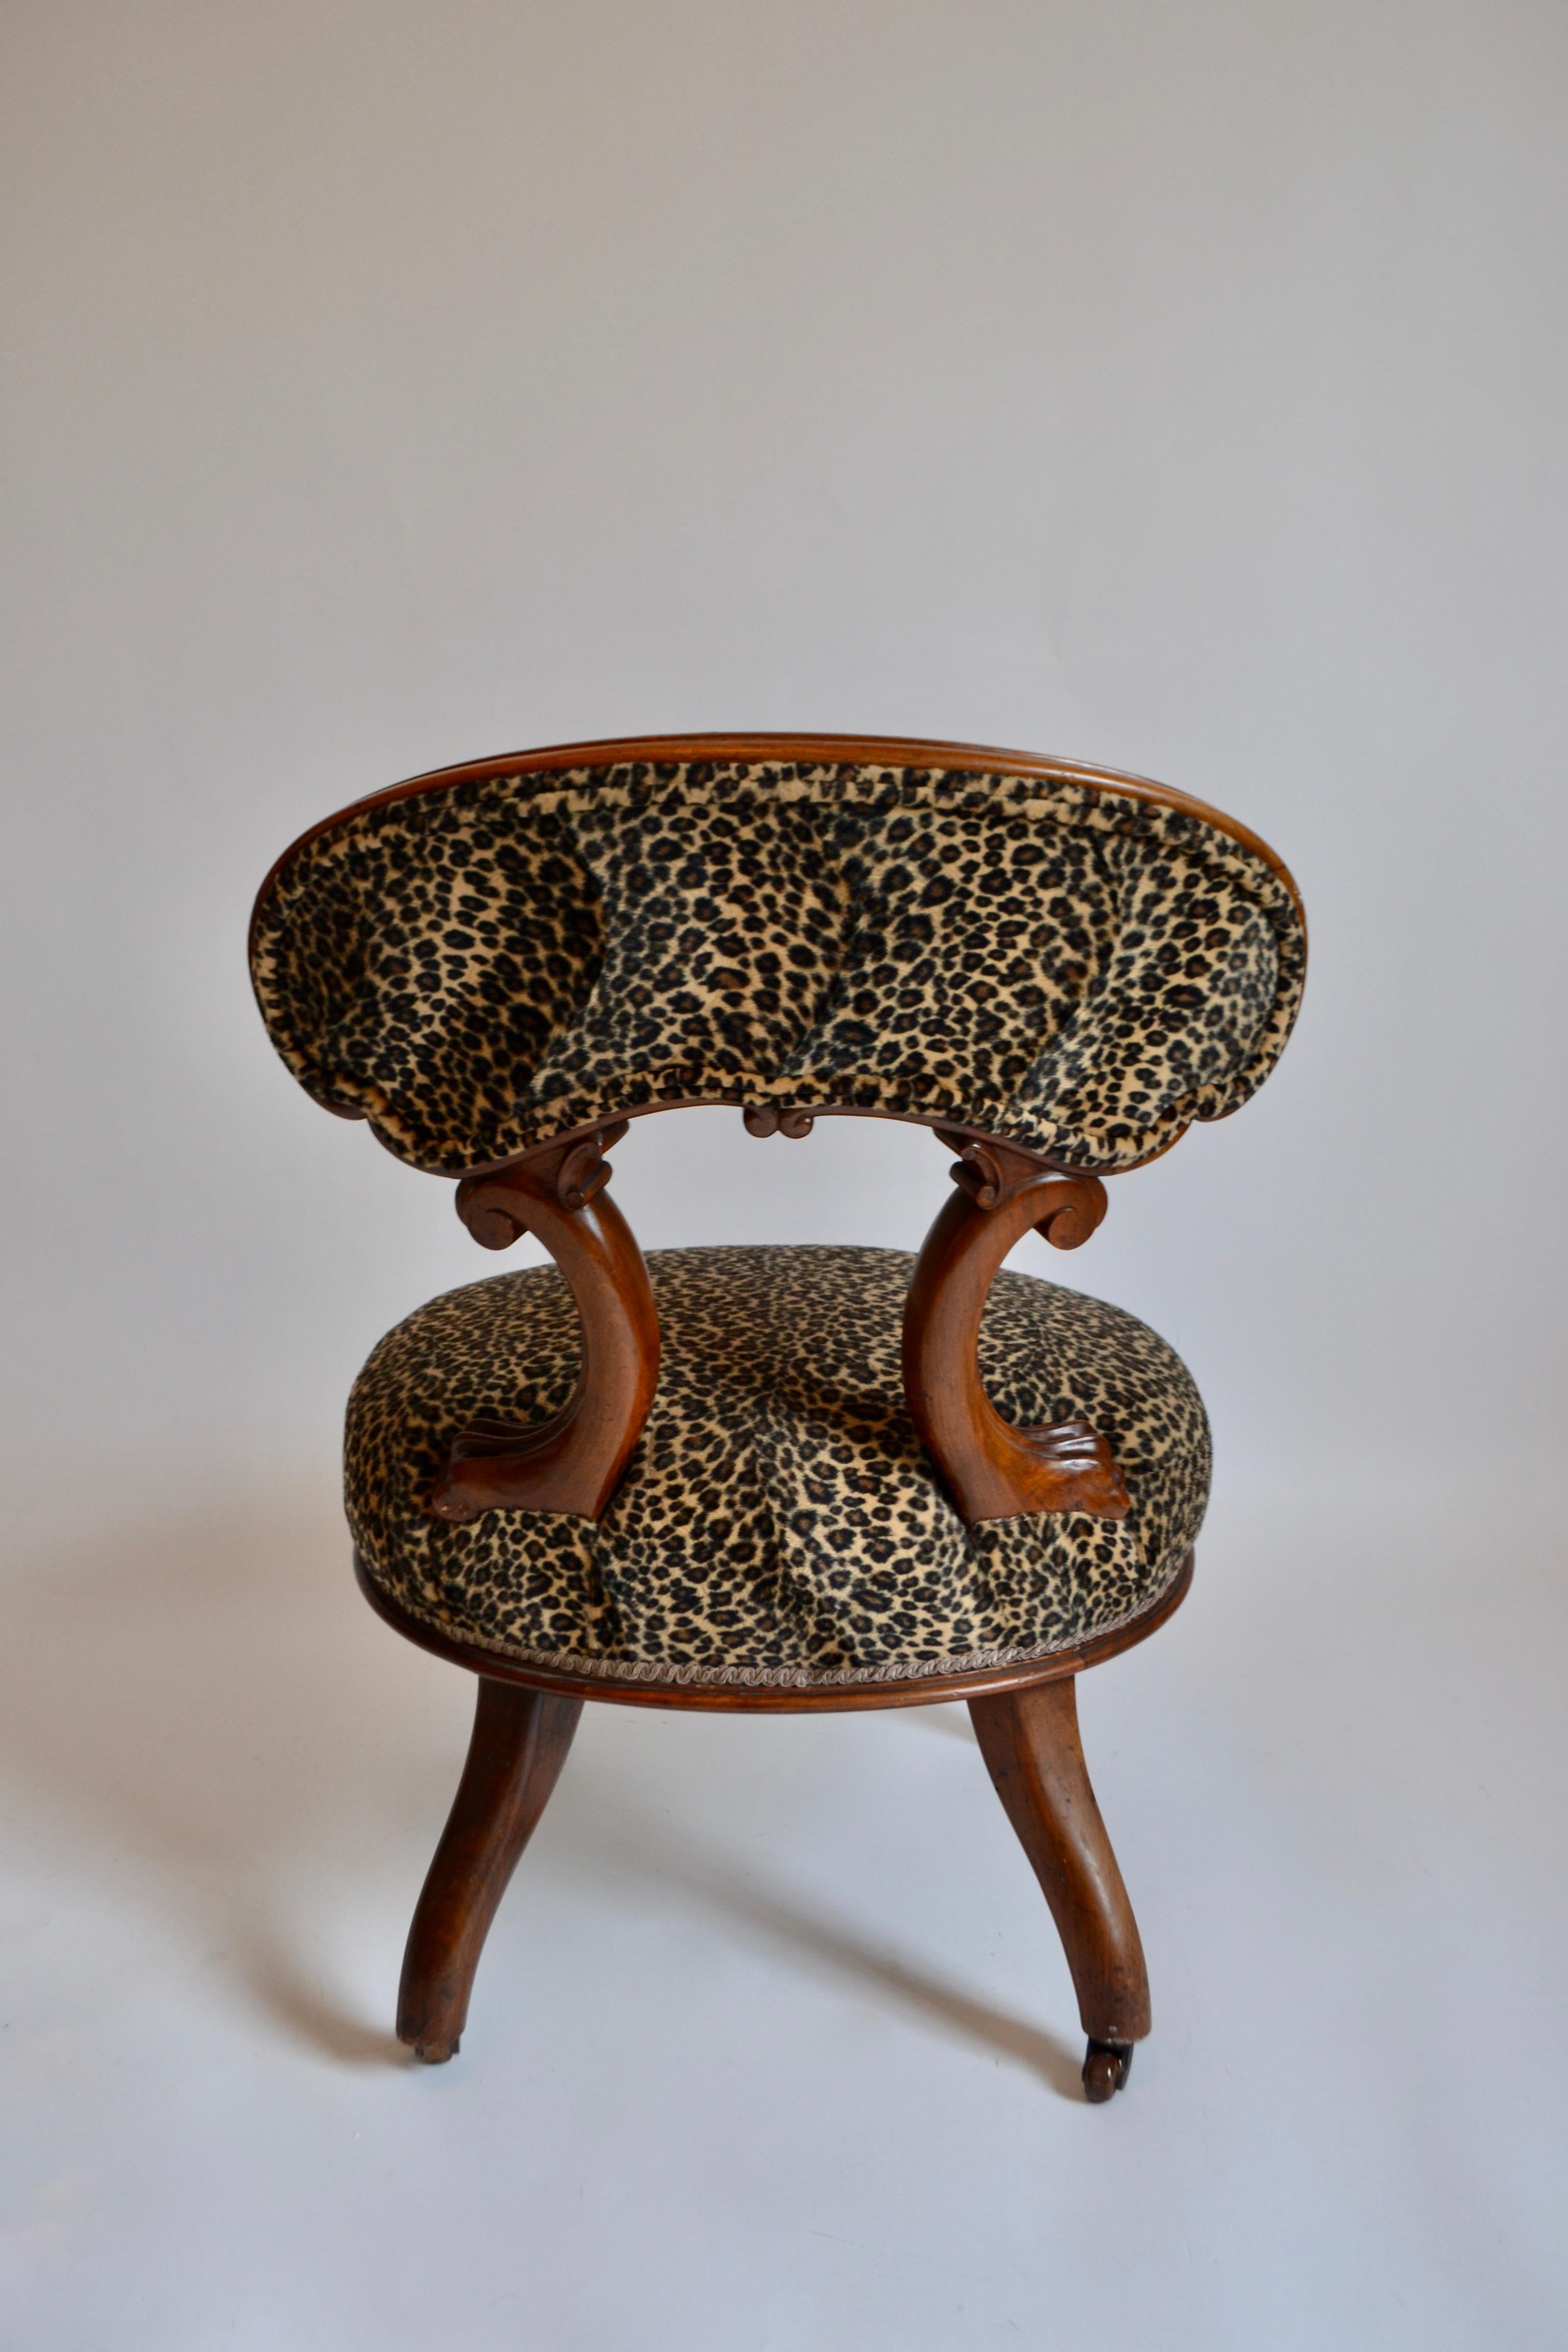 Pair of Victorian Walnut Chairs Upholstered in Faux Leopard Skin, 19th Century 1